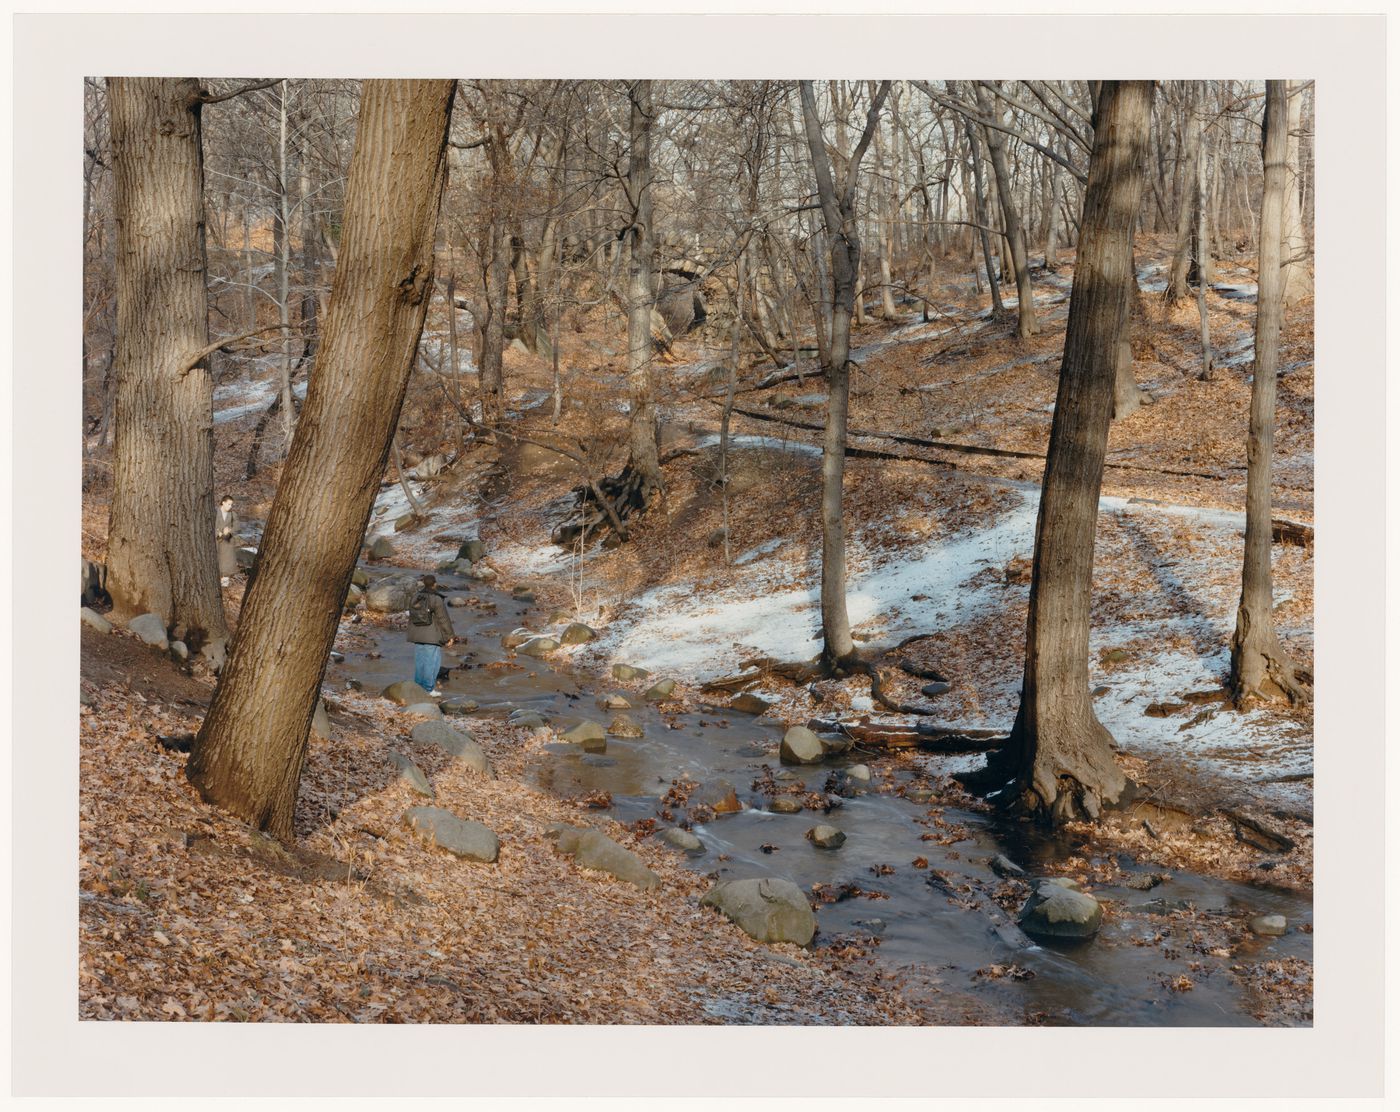 Viewing Olmsted: View of The Woods, Prospect Park, Brooklyn, New York City, New York